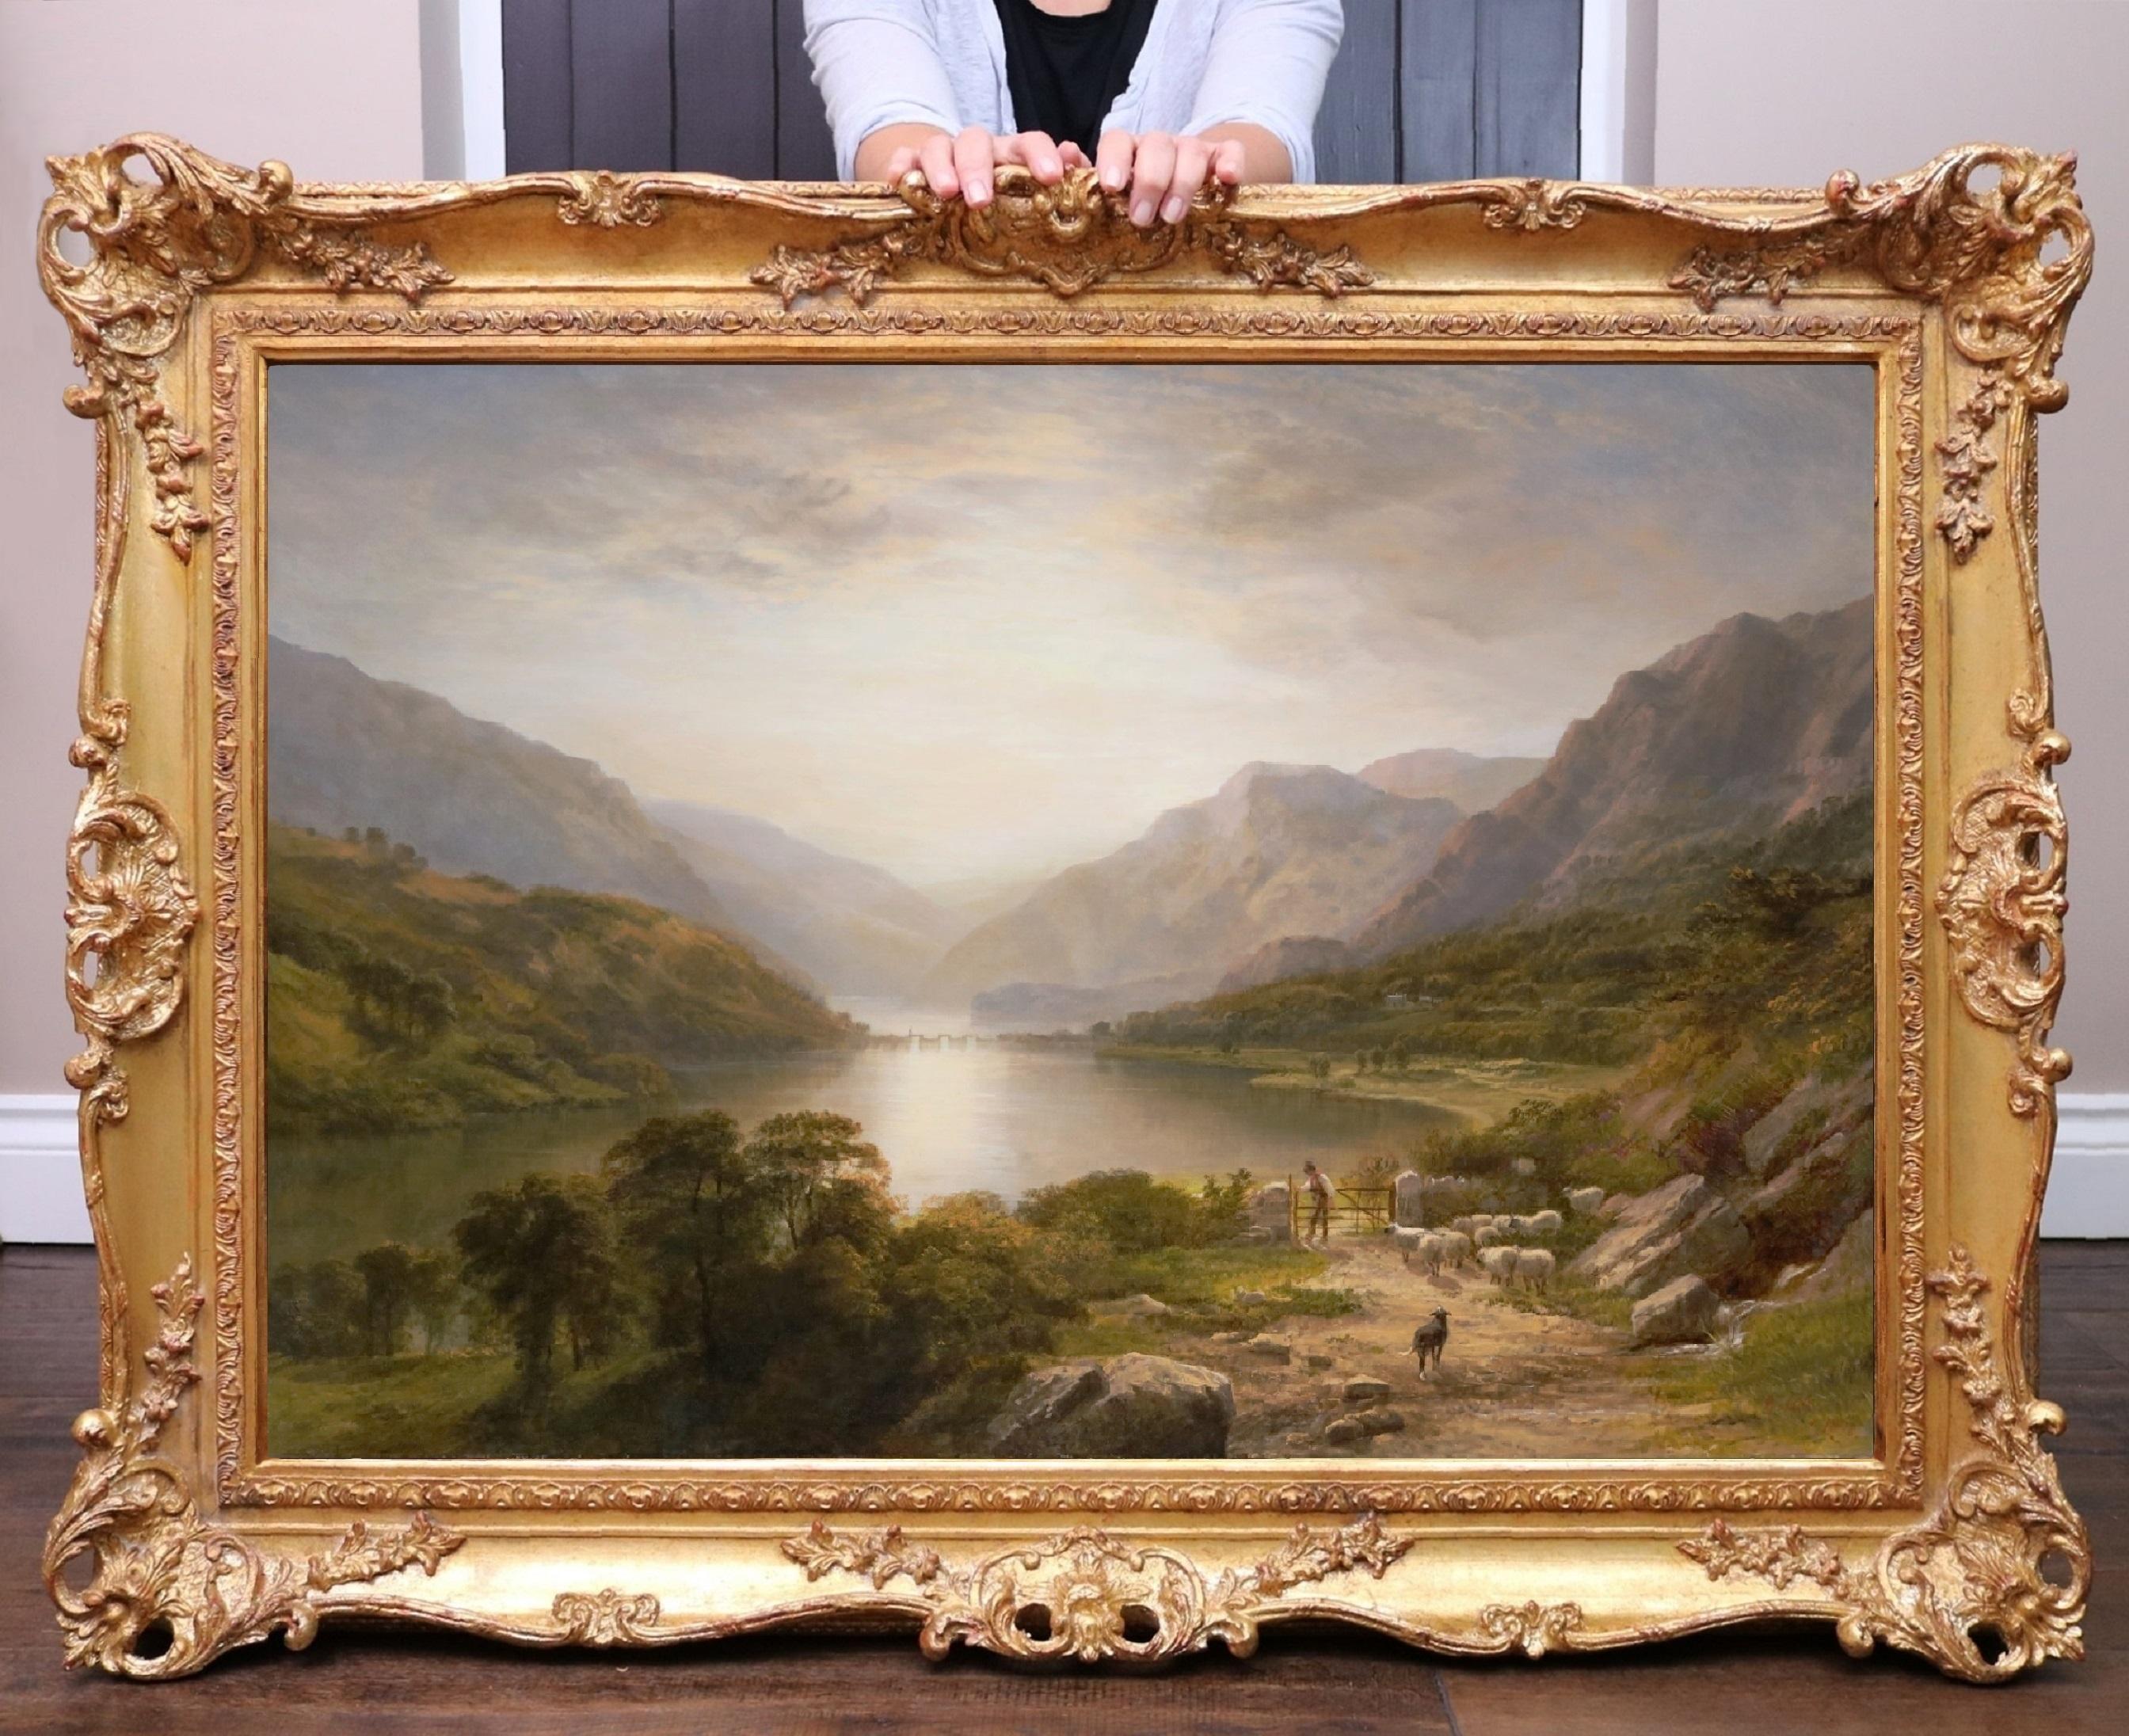 George Cole Animal Painting - The Lake District - Large 19th Century English Sunset Landscape Painting